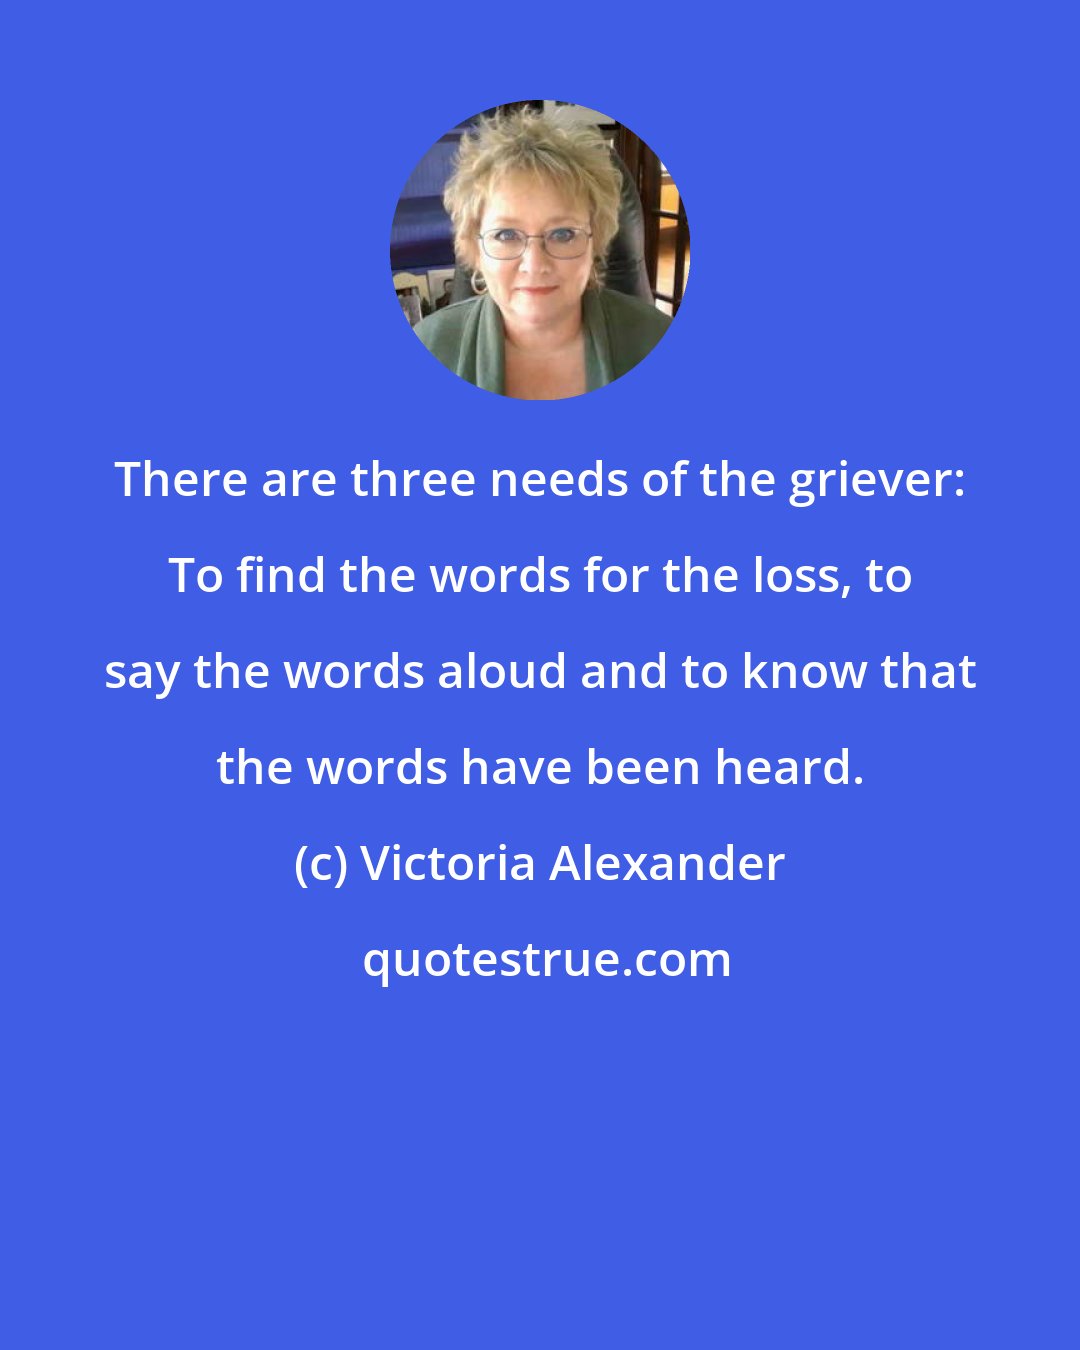 Victoria Alexander: There are three needs of the griever: To find the words for the loss, to say the words aloud and to know that the words have been heard.